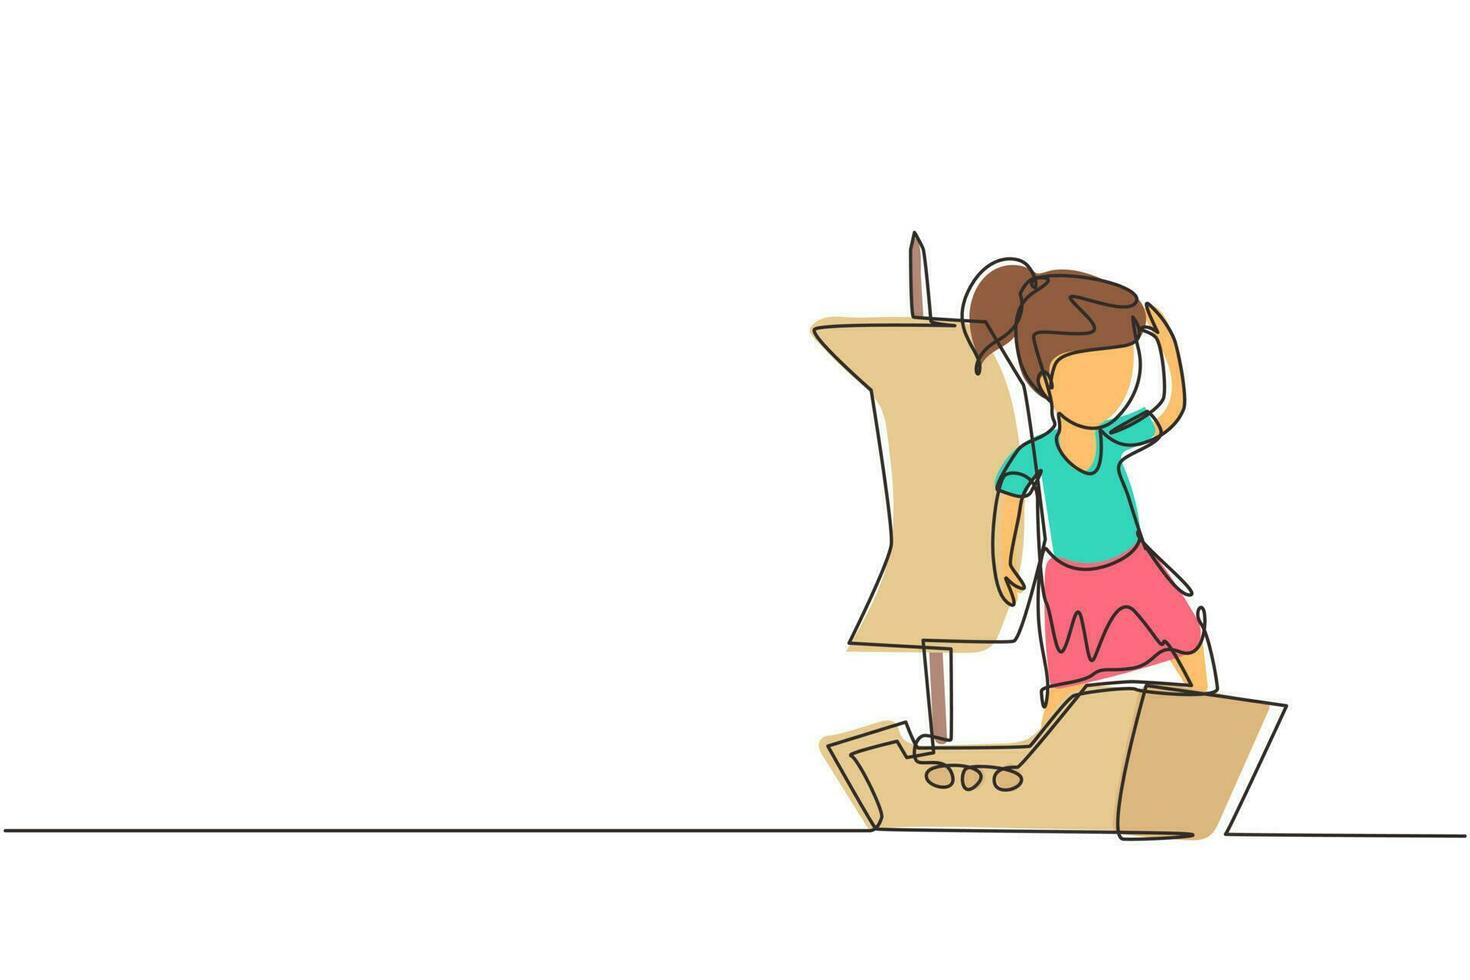 Single continuous line drawing little girl playing sailor with boat made of cardboard box. Creative kid character playing ship made of cardboard boxes. One line draw graphic design vector illustration